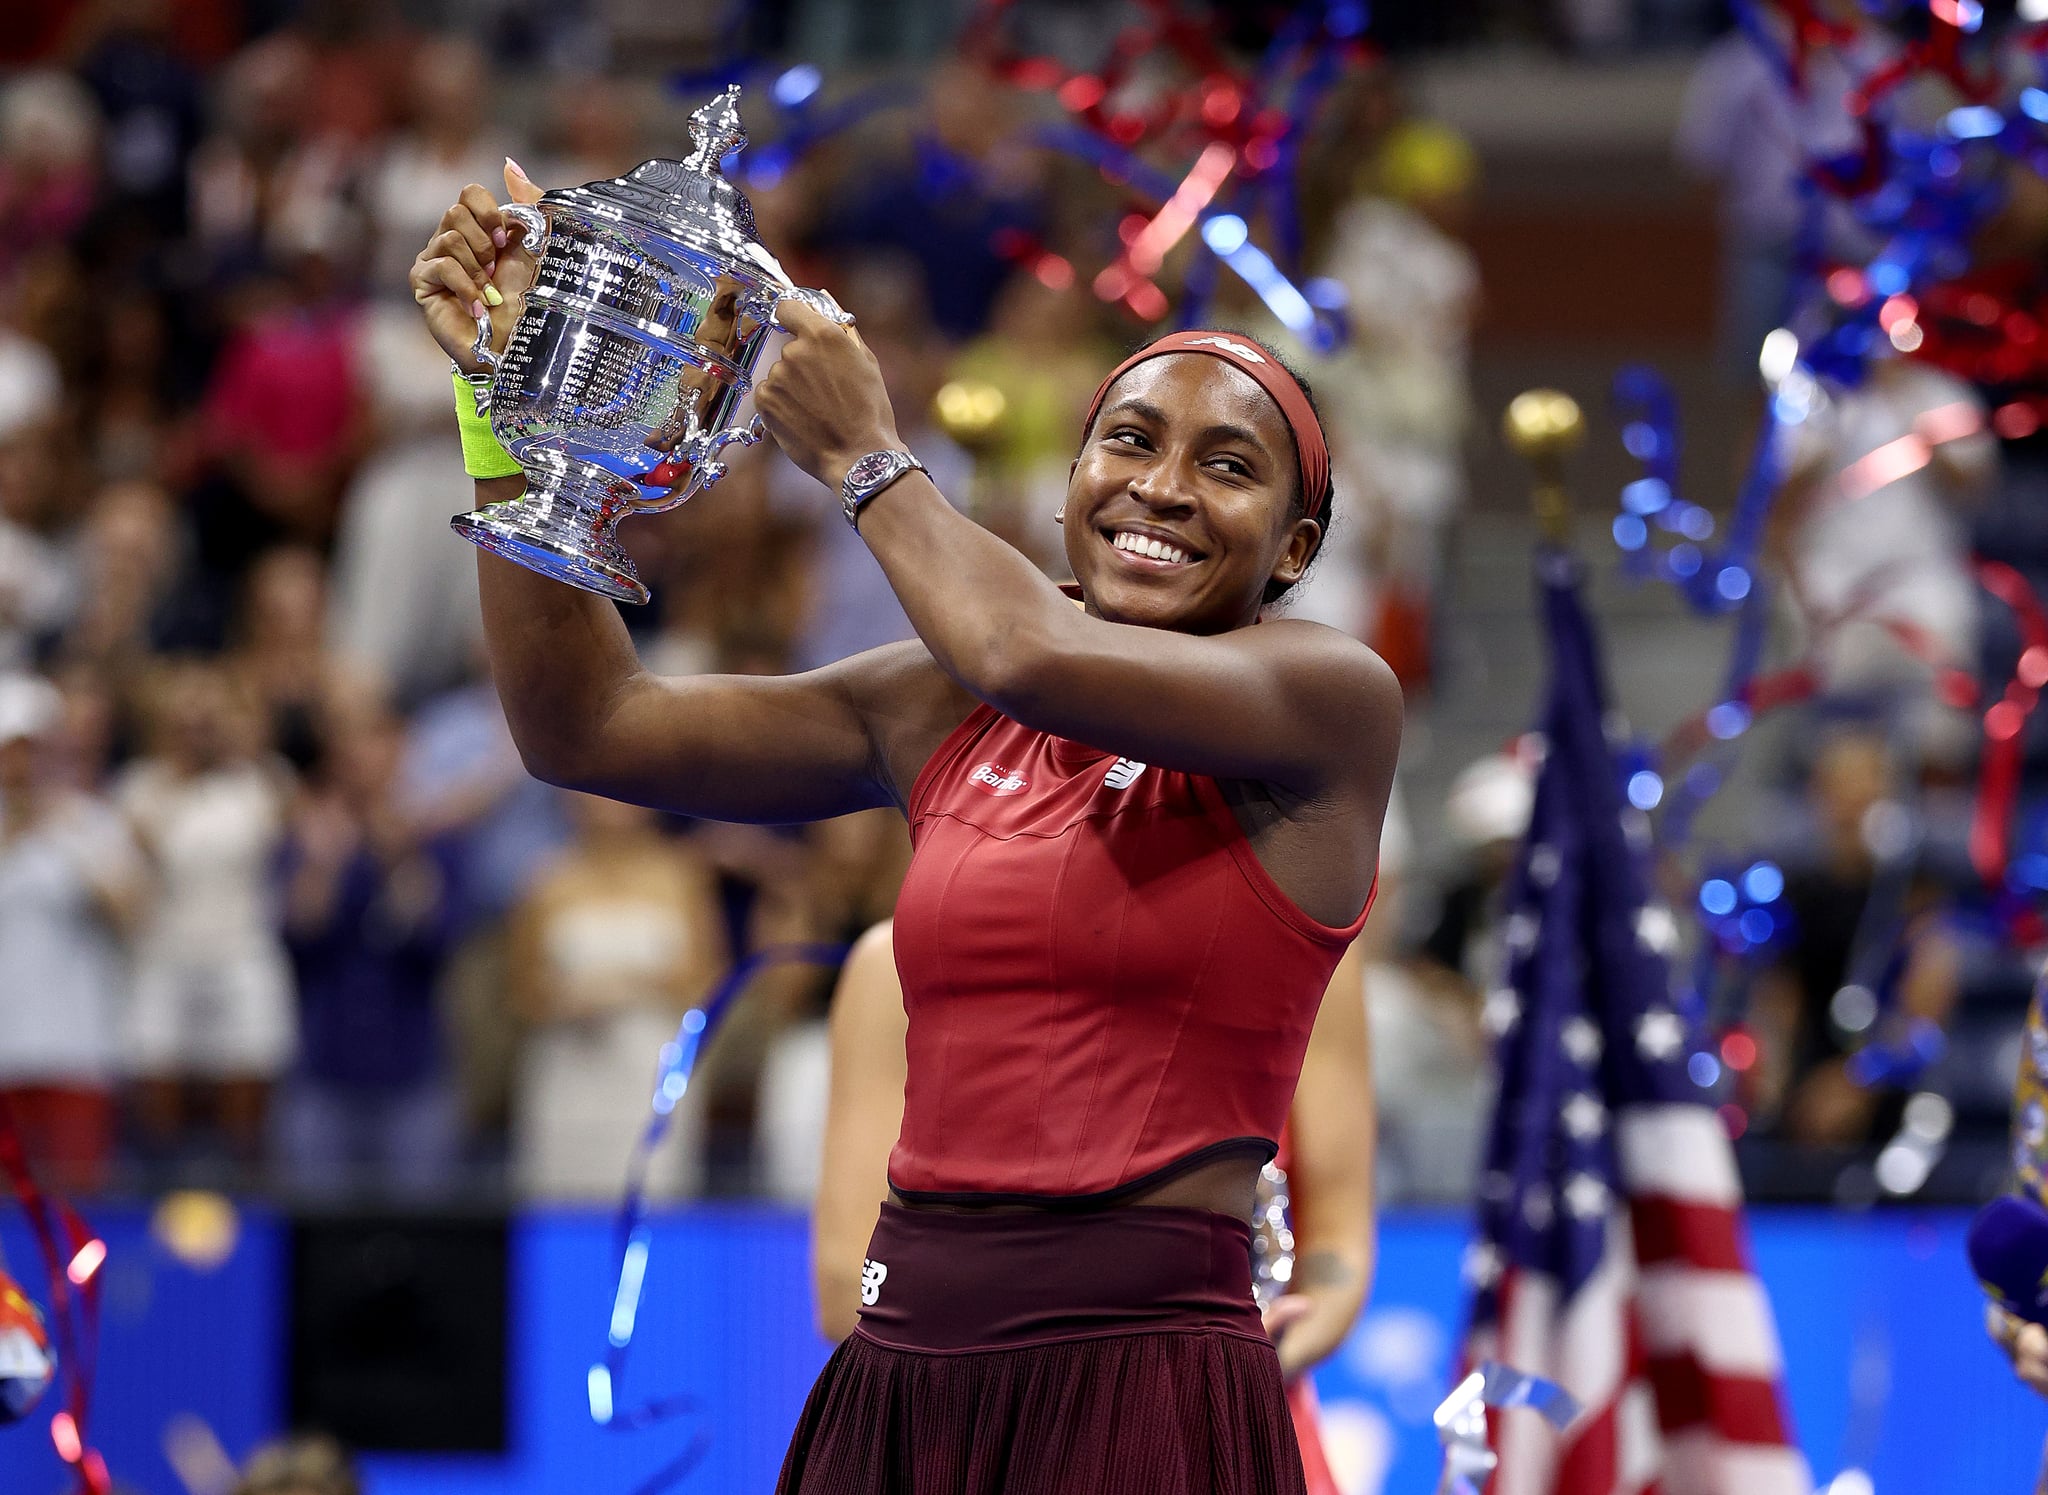 NEW YORK, NEW YORK - SEPTEMBER 09: Coco Gauff of the United States celebrates after defeating Aryna Sabalenka of Belarus in their Women's Singles Final match on Day Thirteen of the 2023 US Open at the USTA Billie Jean King National Tennis Centre on September 09, 2023 in the Flushing neighbourhood of the Queens borough of New York City. (Photo by Elsa/Getty Images)